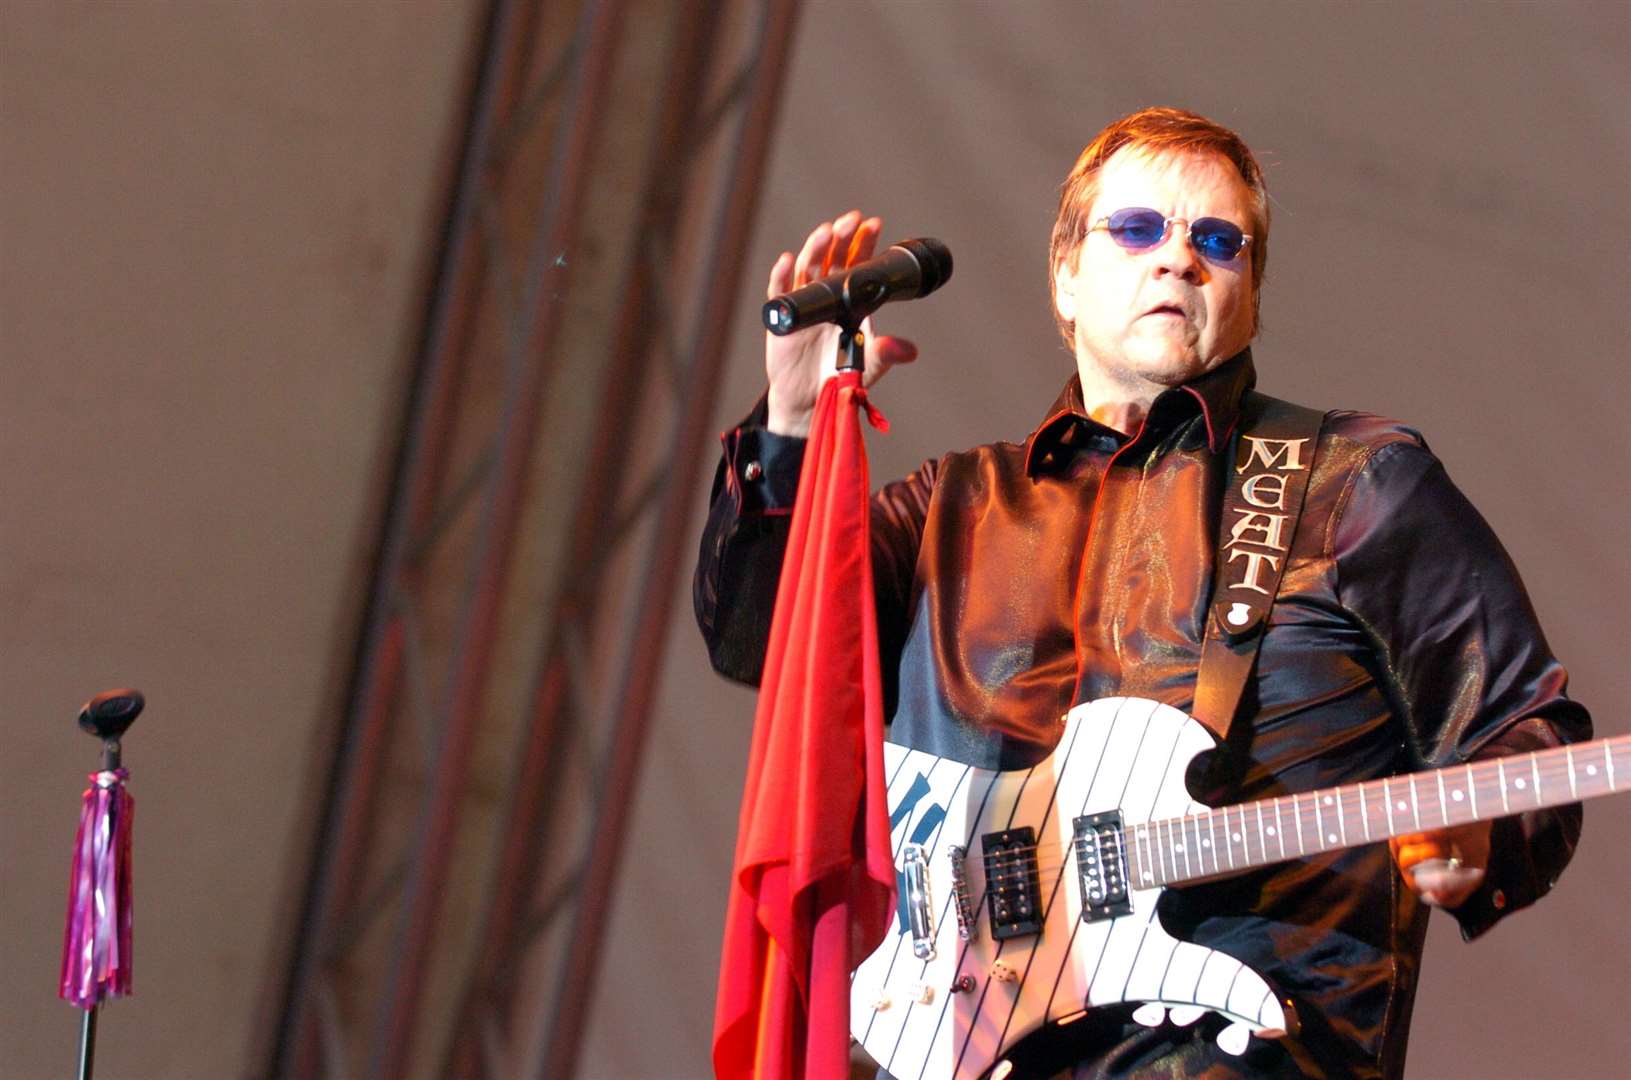 Meat Loaf plays to a 12,000 strong audience in the grounds of Leeds Castle